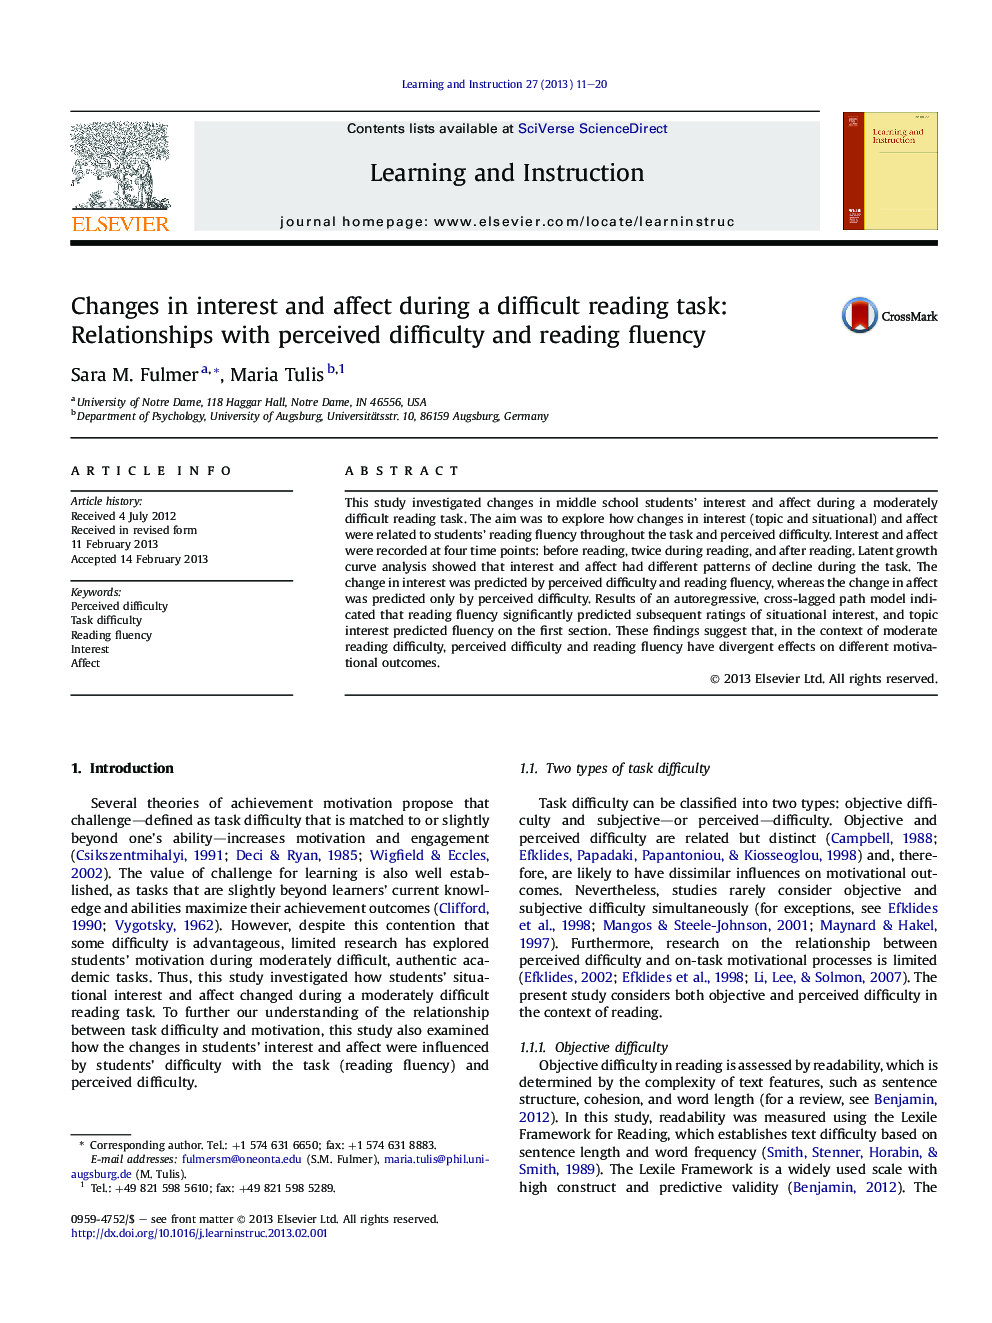 Changes in interest and affect during a difficult reading task: Relationships with perceived difficulty and reading fluency